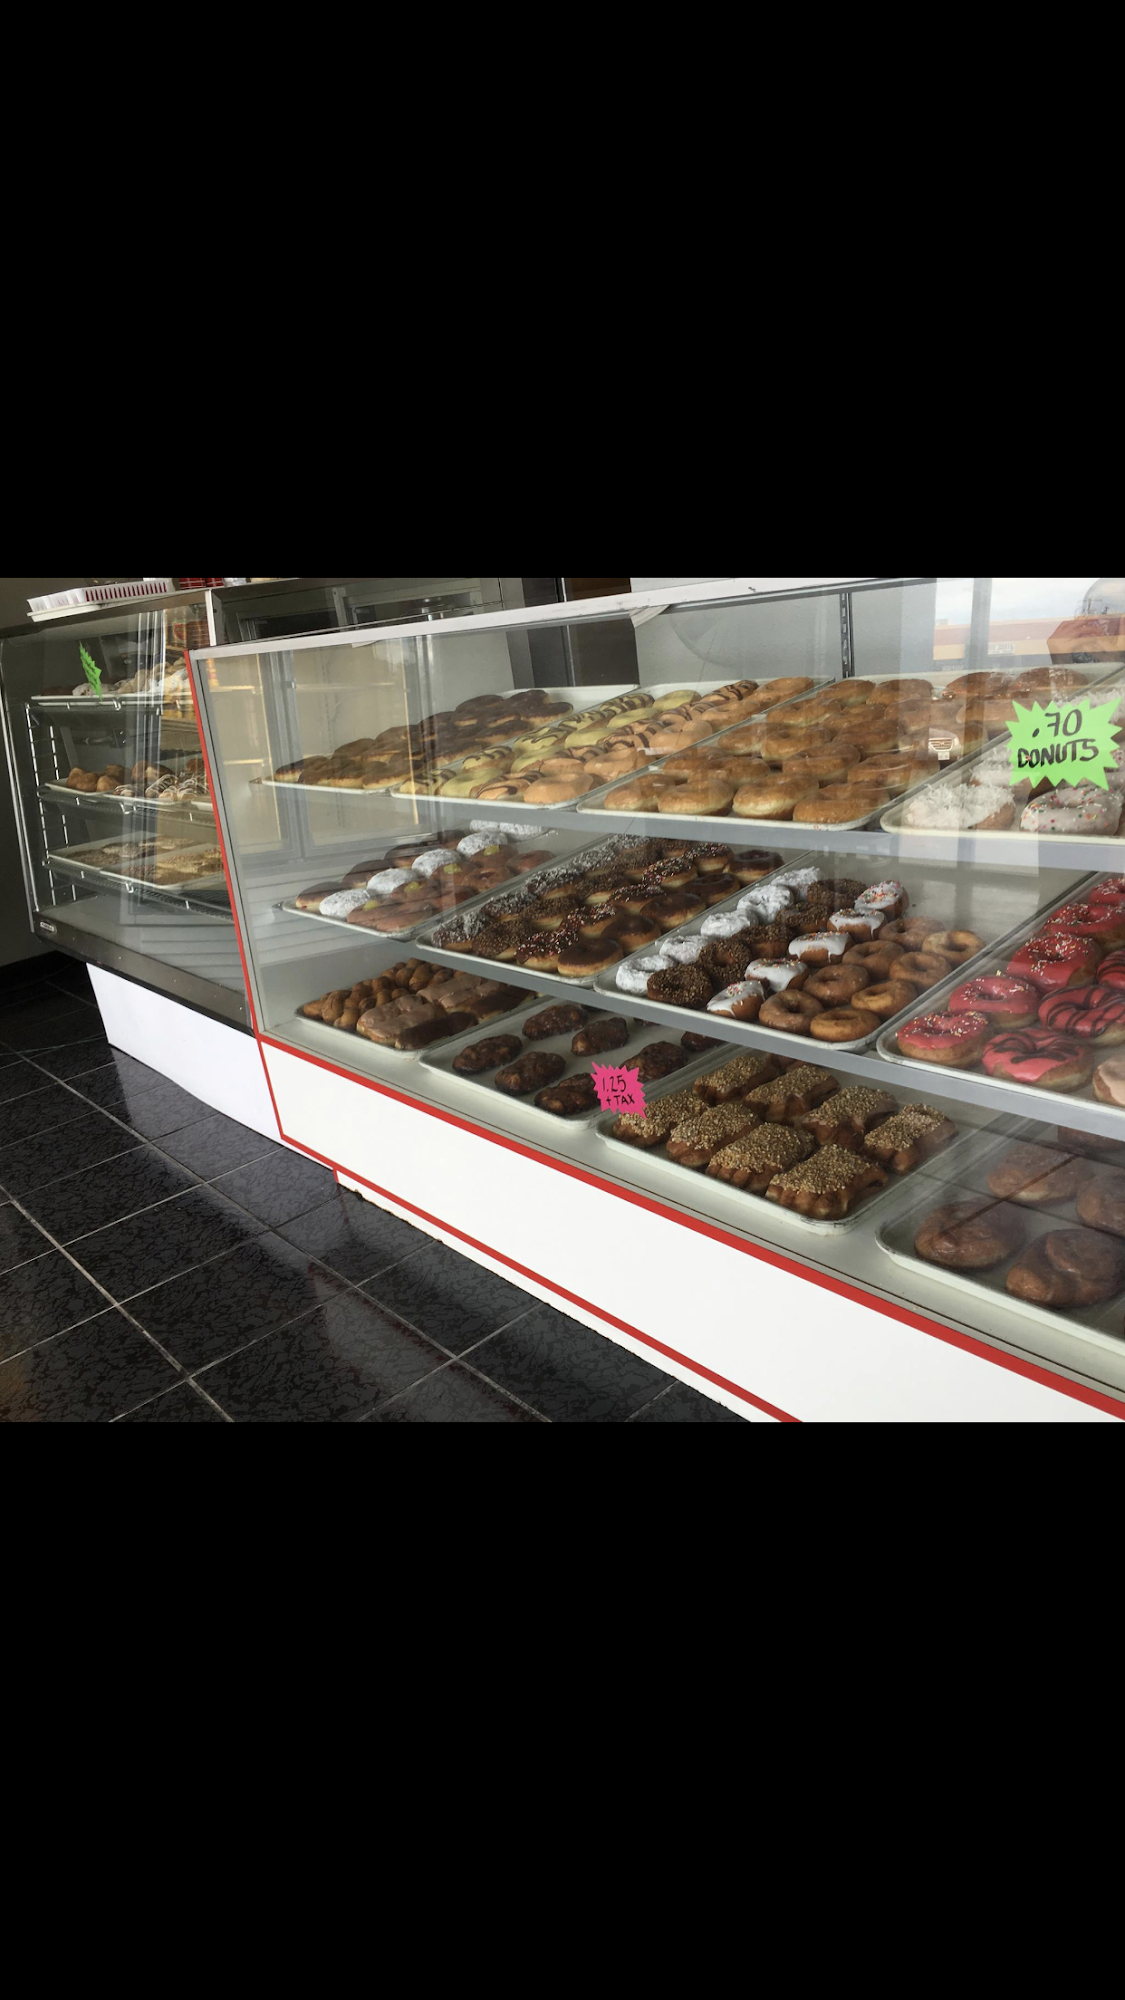 Marcy’s Donuts